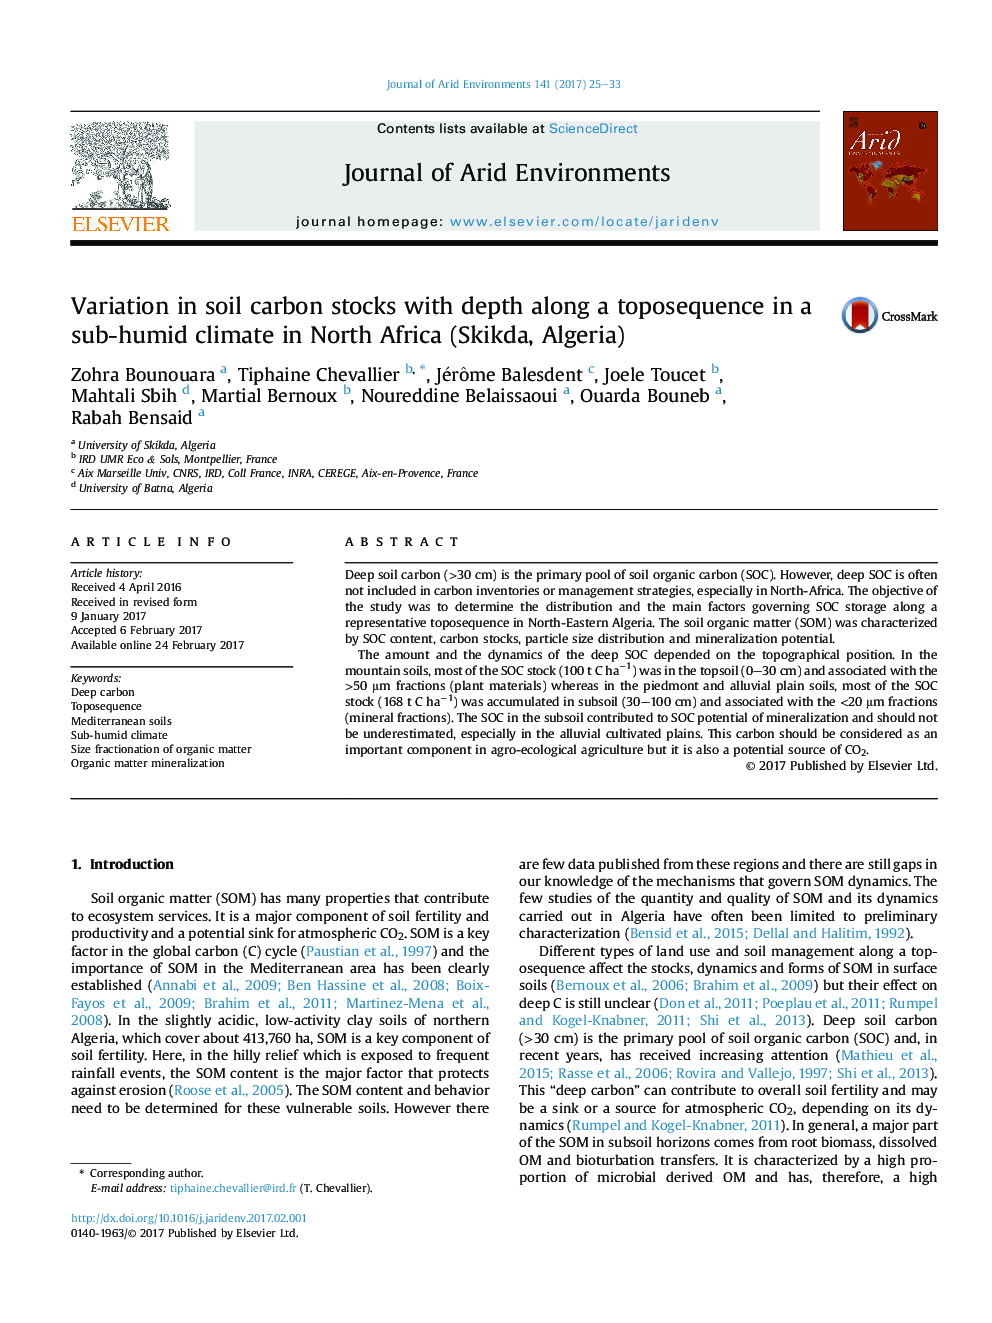 Variation in soil carbon stocks with depth along a toposequence in a sub-humid climate in North Africa (Skikda, Algeria)